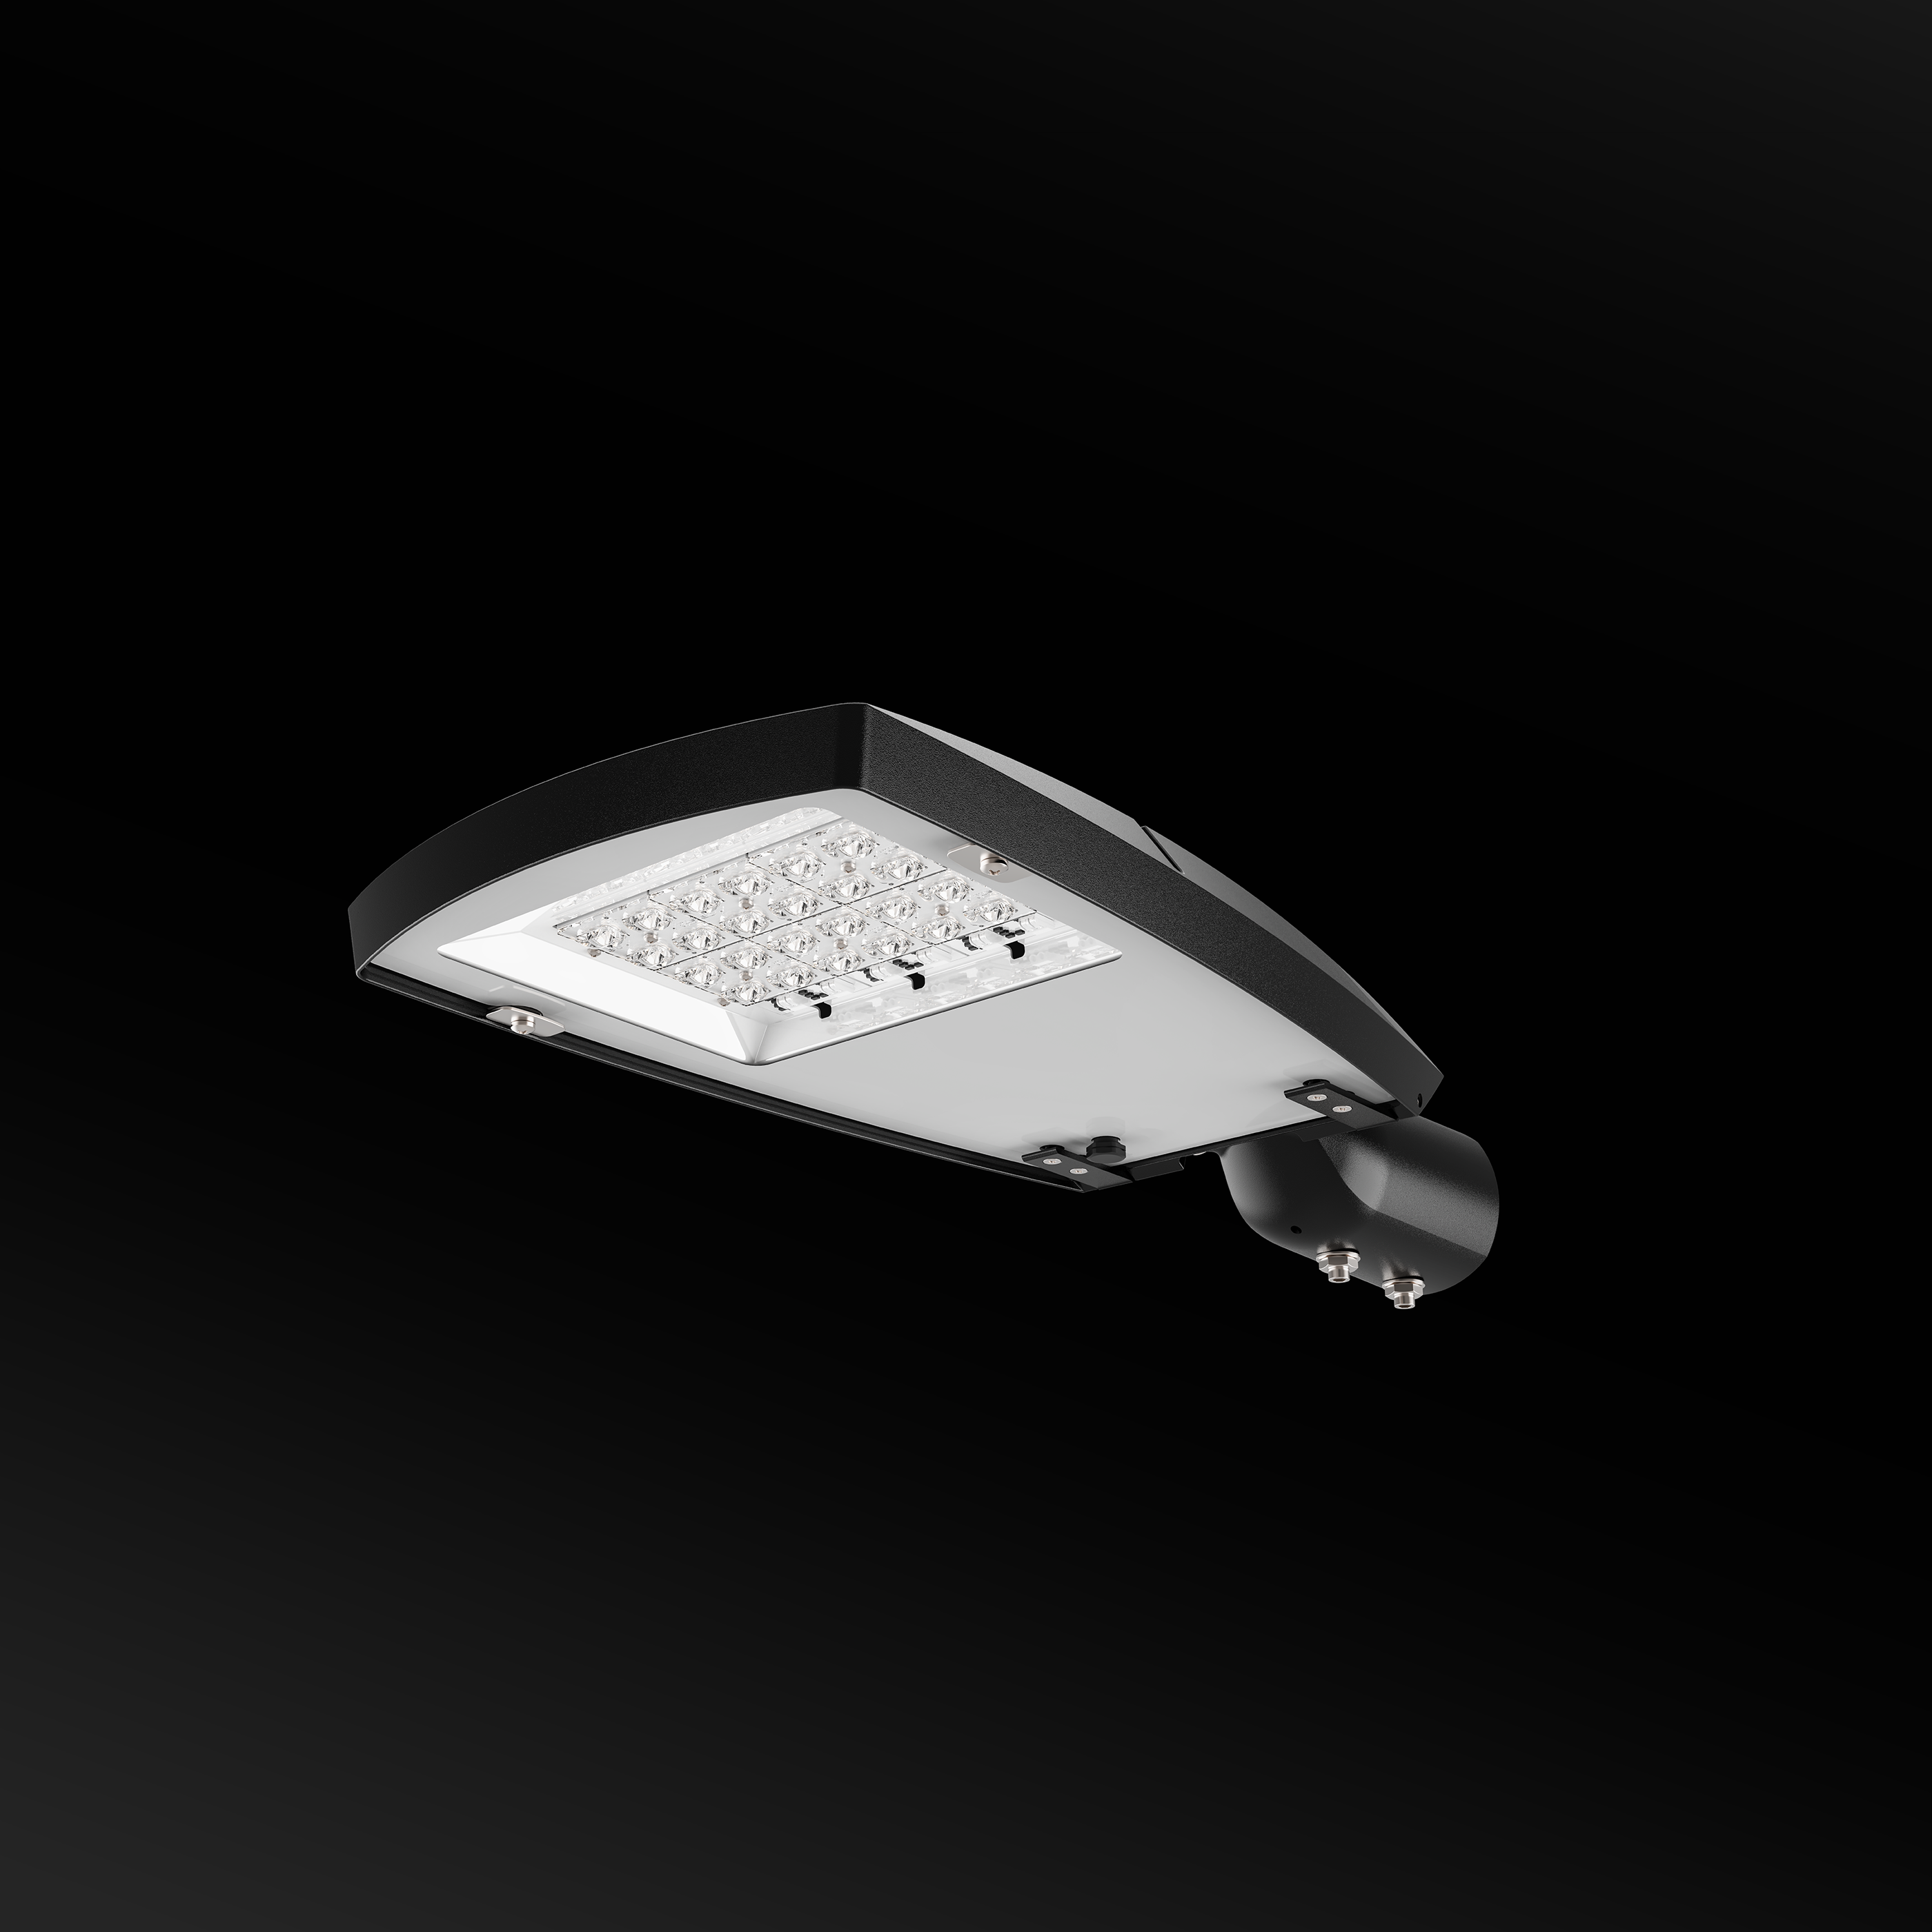 The Nox S's clean lines & subtle profile result in an elegant, modern luminaire suitable for a wide range of urban and infrastructure environments.